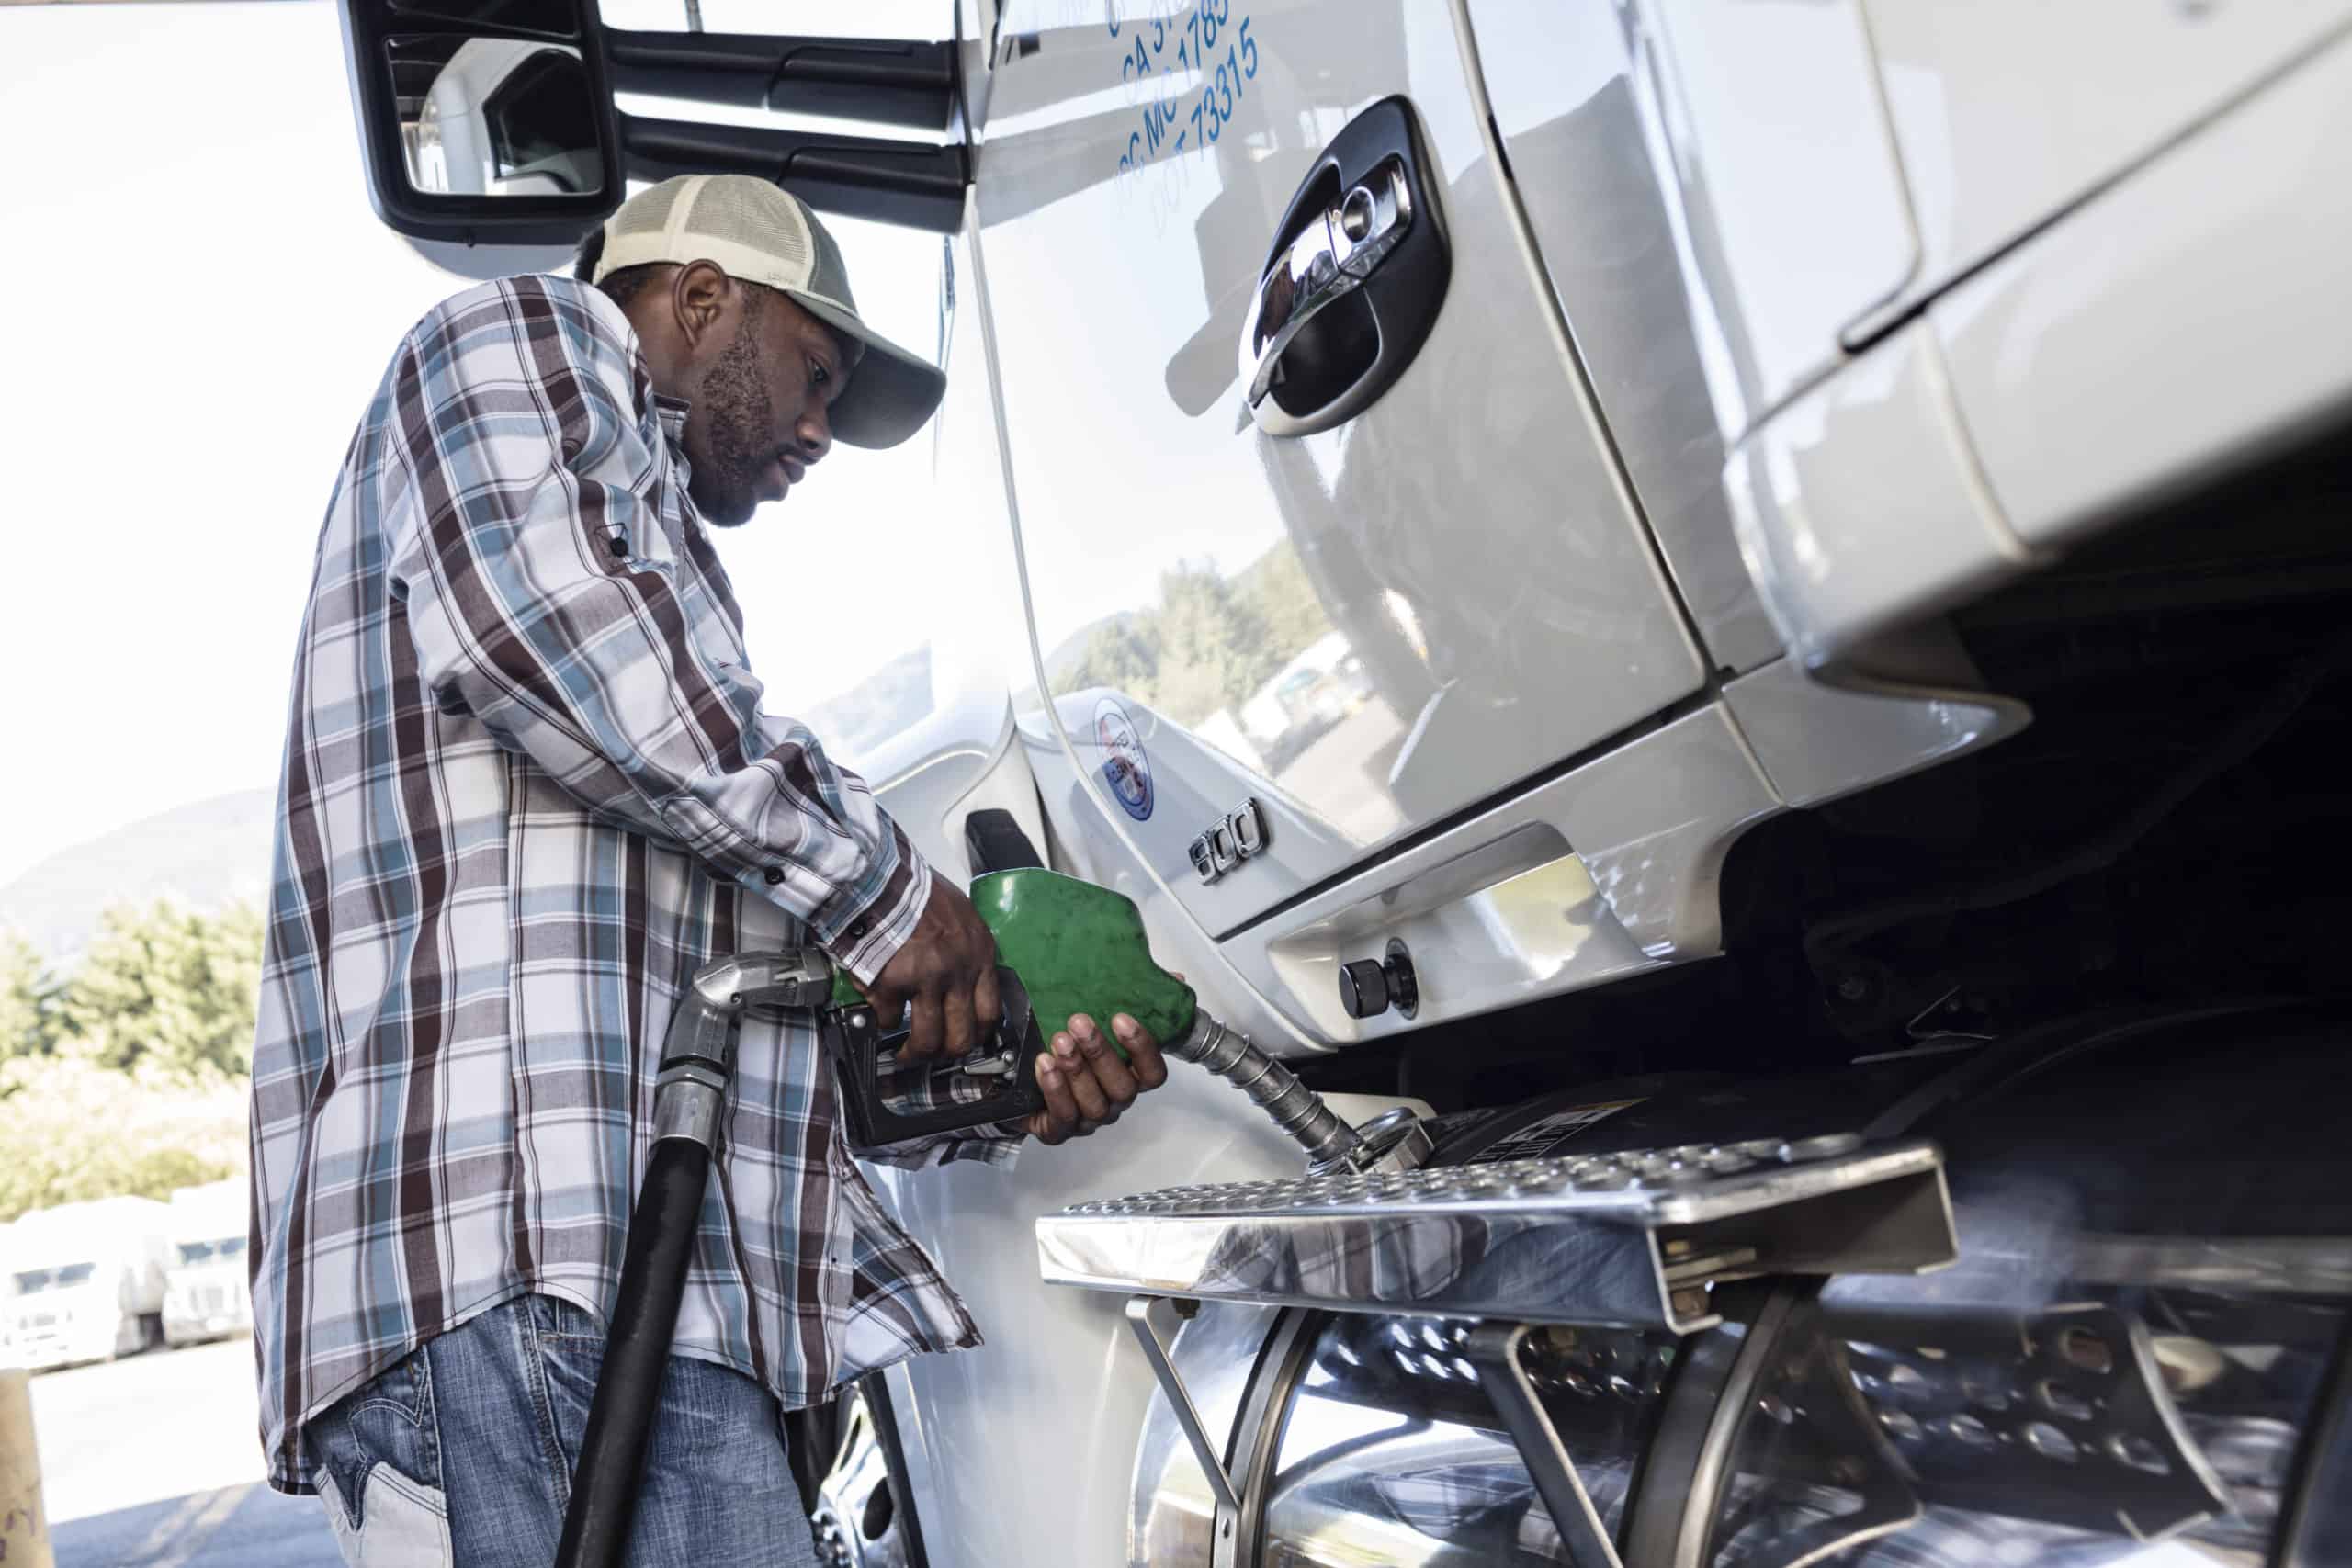 putting fuel in truck, federal fuel excise tax